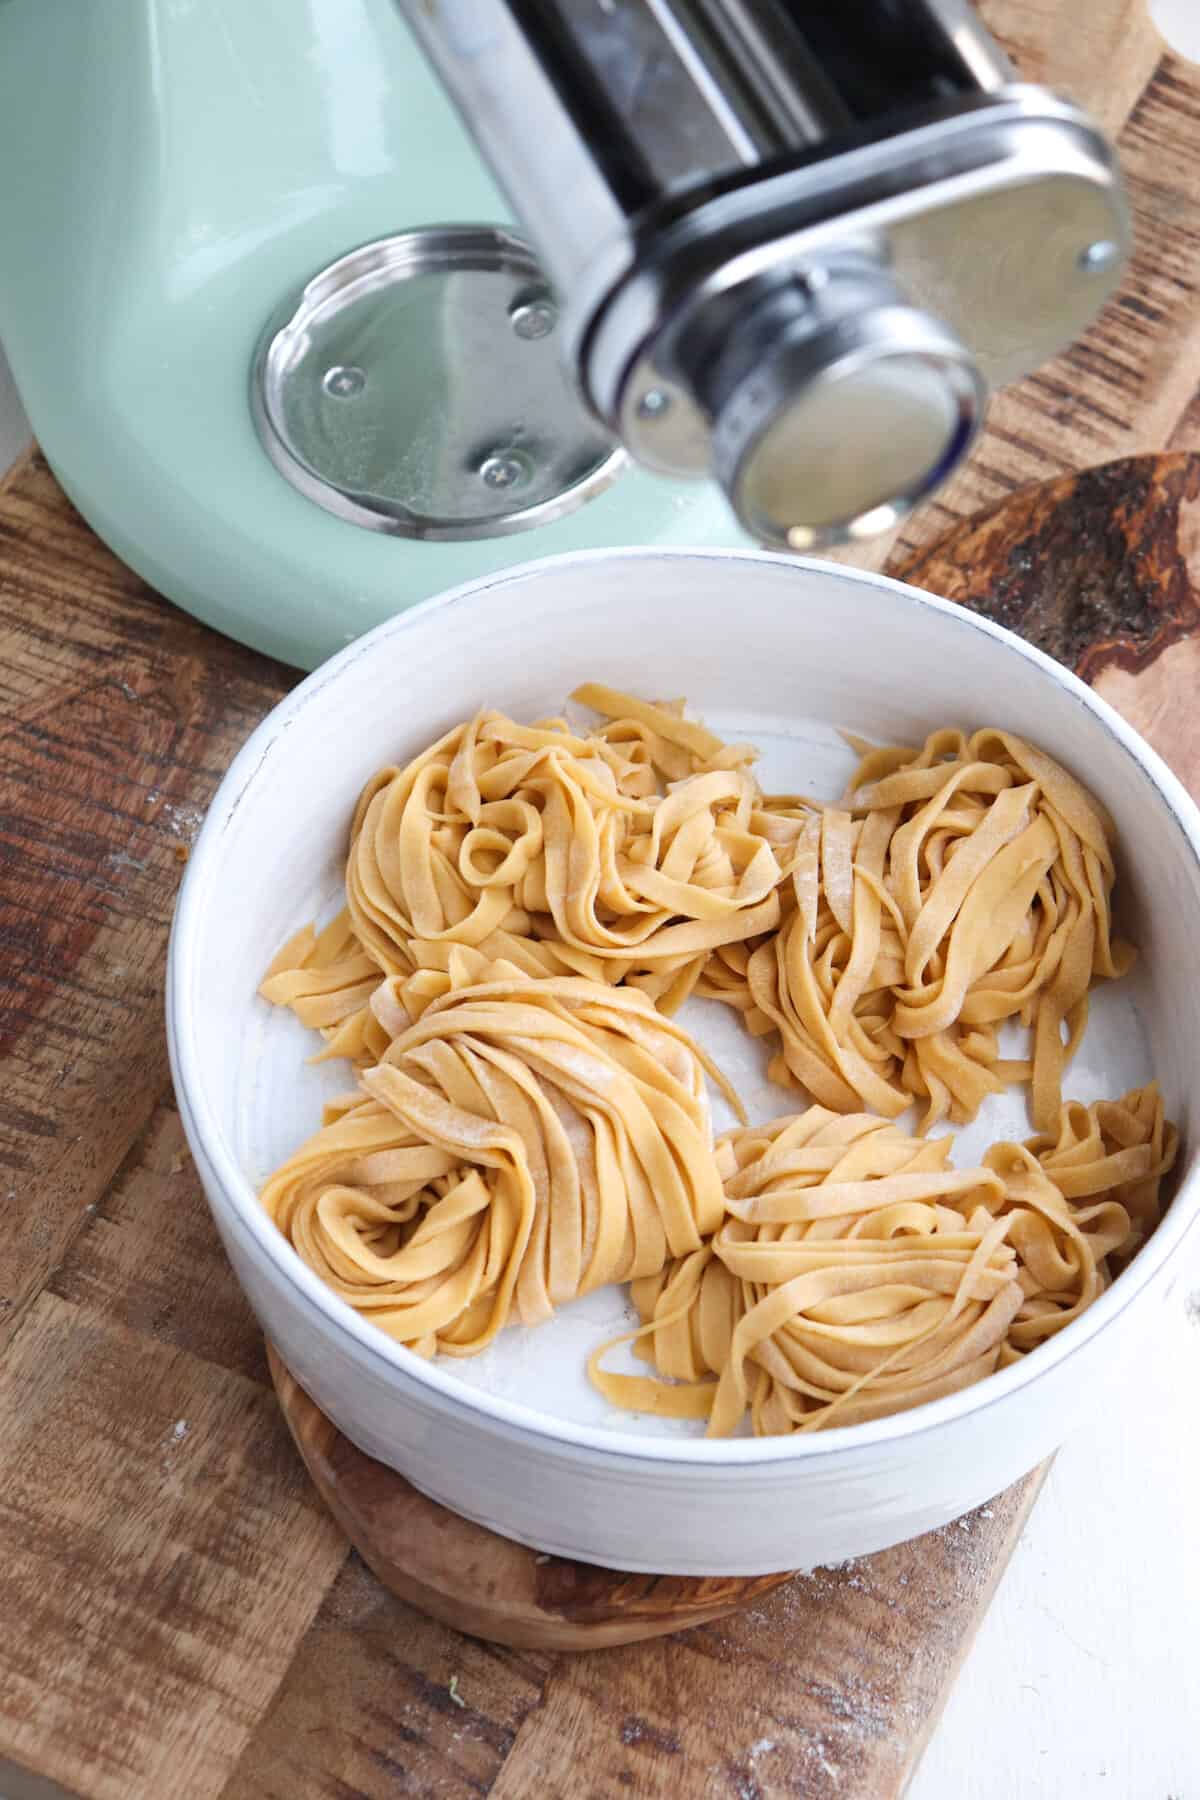 4 nests of fresh pasta in front of kitchenaid mixer.